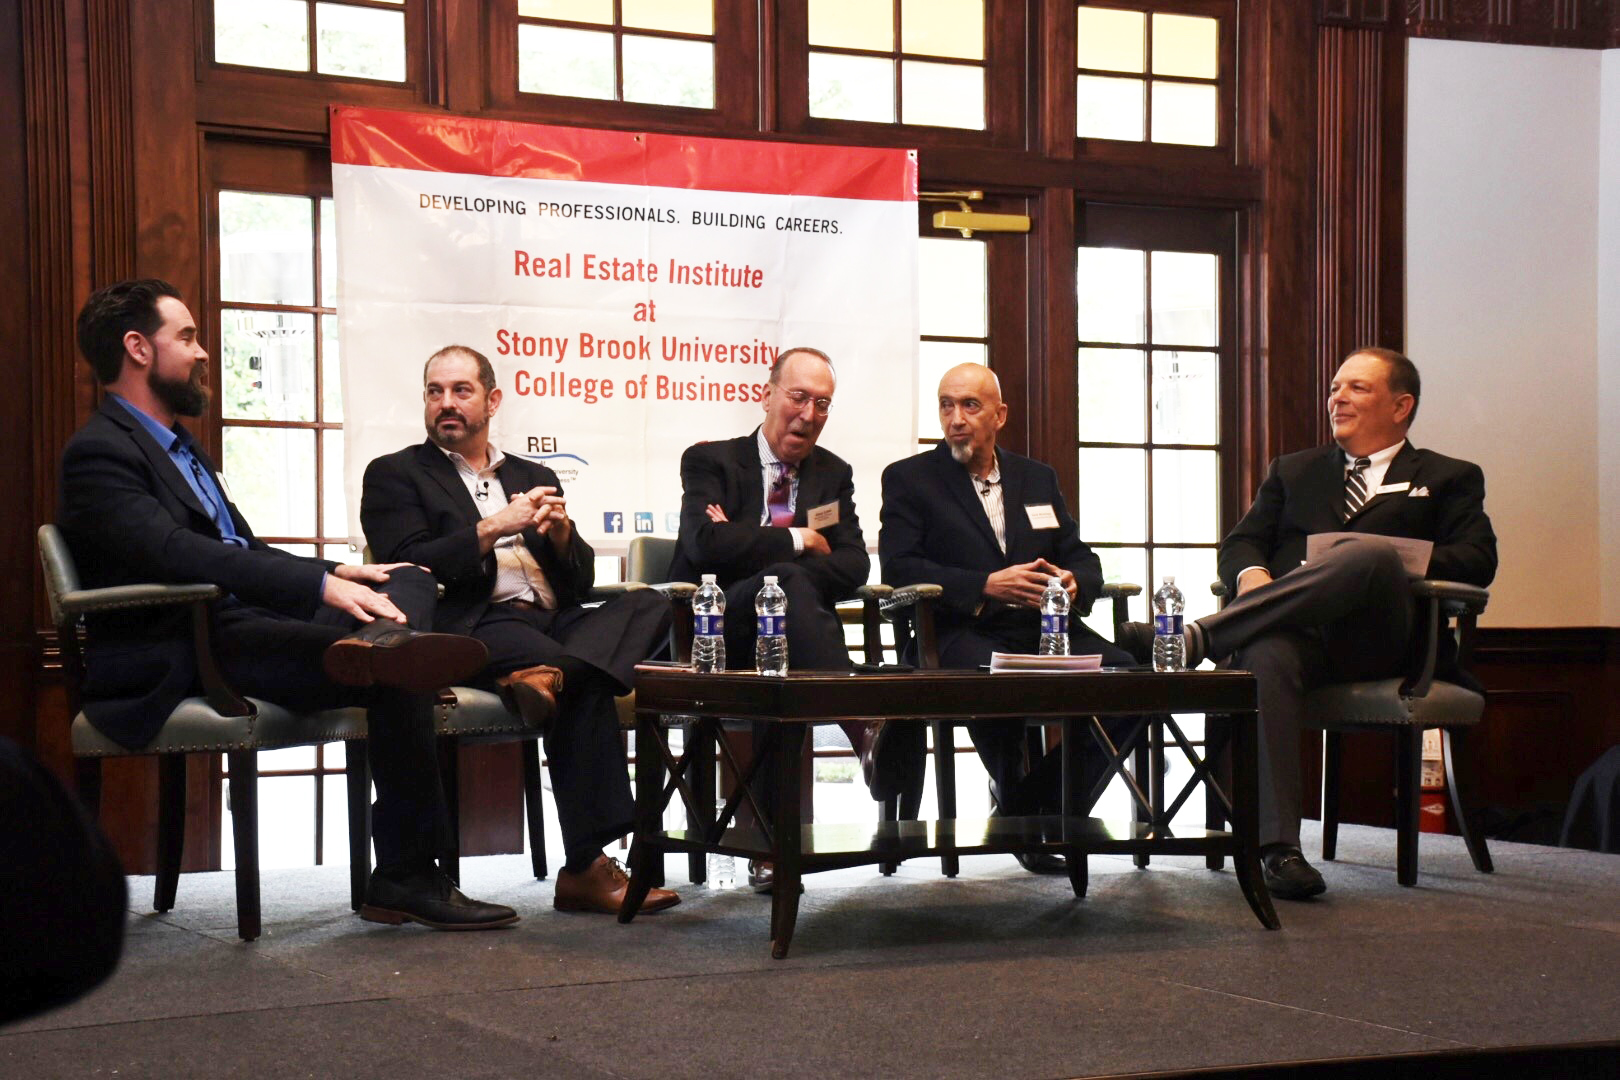 TRITEC's Vice President of Marketing Chris Kelly sits on a panel with Brandon Palanker of 3BL Strategies, Gary Lewi of Rubenstein, David Winzelberg of Long Island Business News moderated by David Pennetta of Cushman and Wakefield.